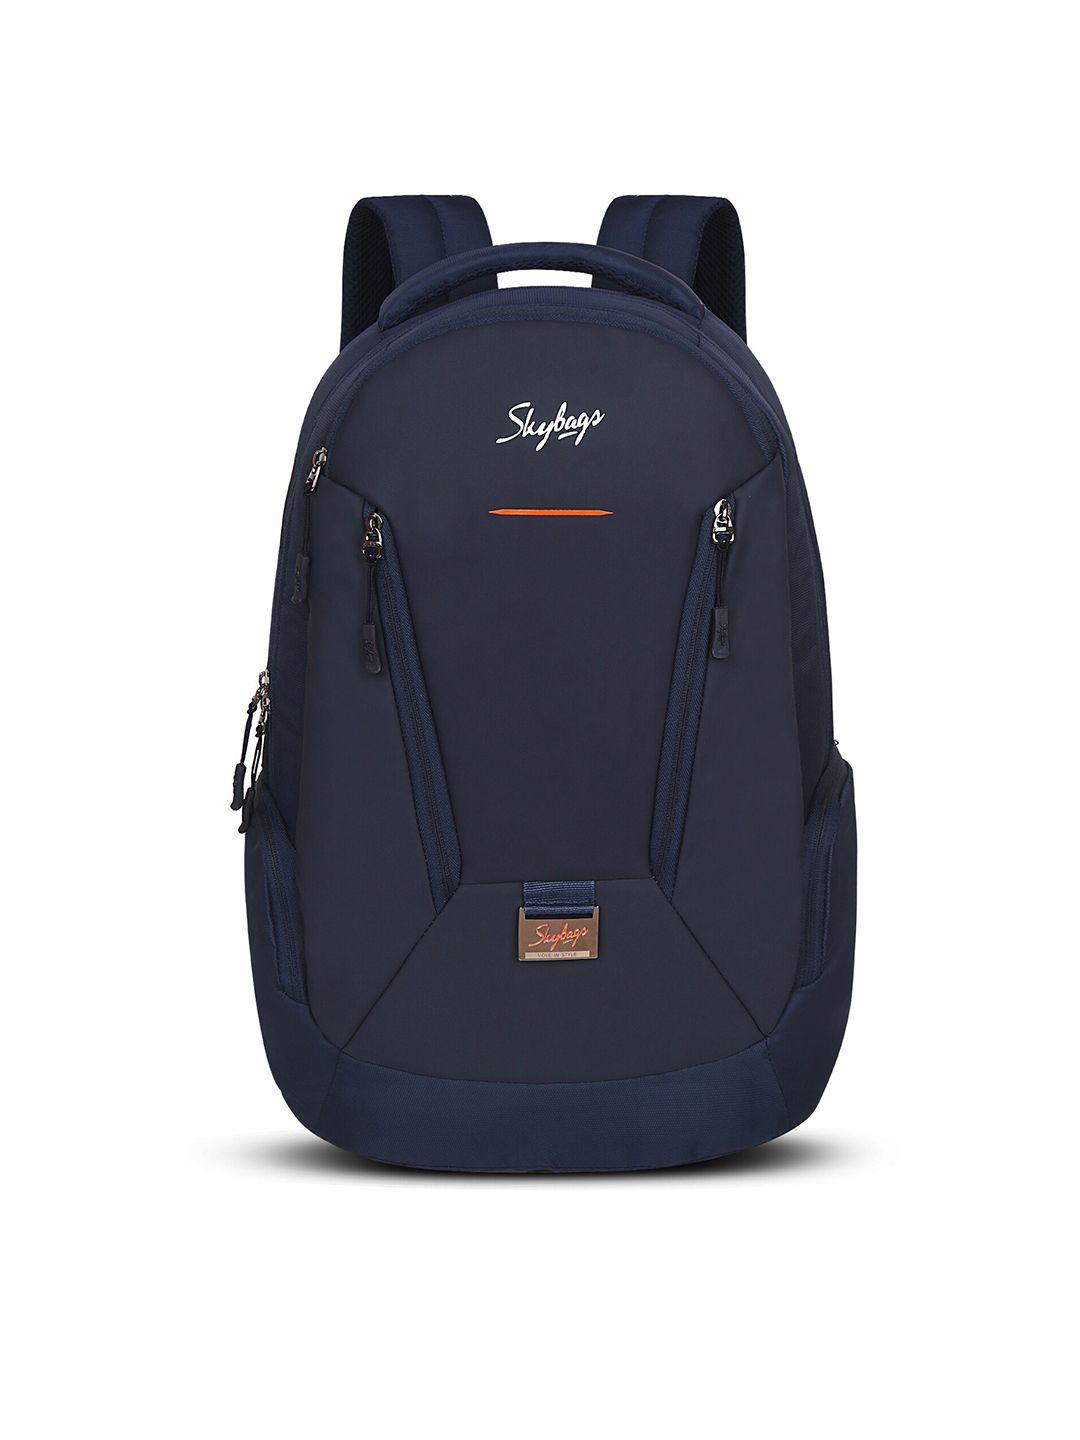 skybags unisex navy blue solid backpack